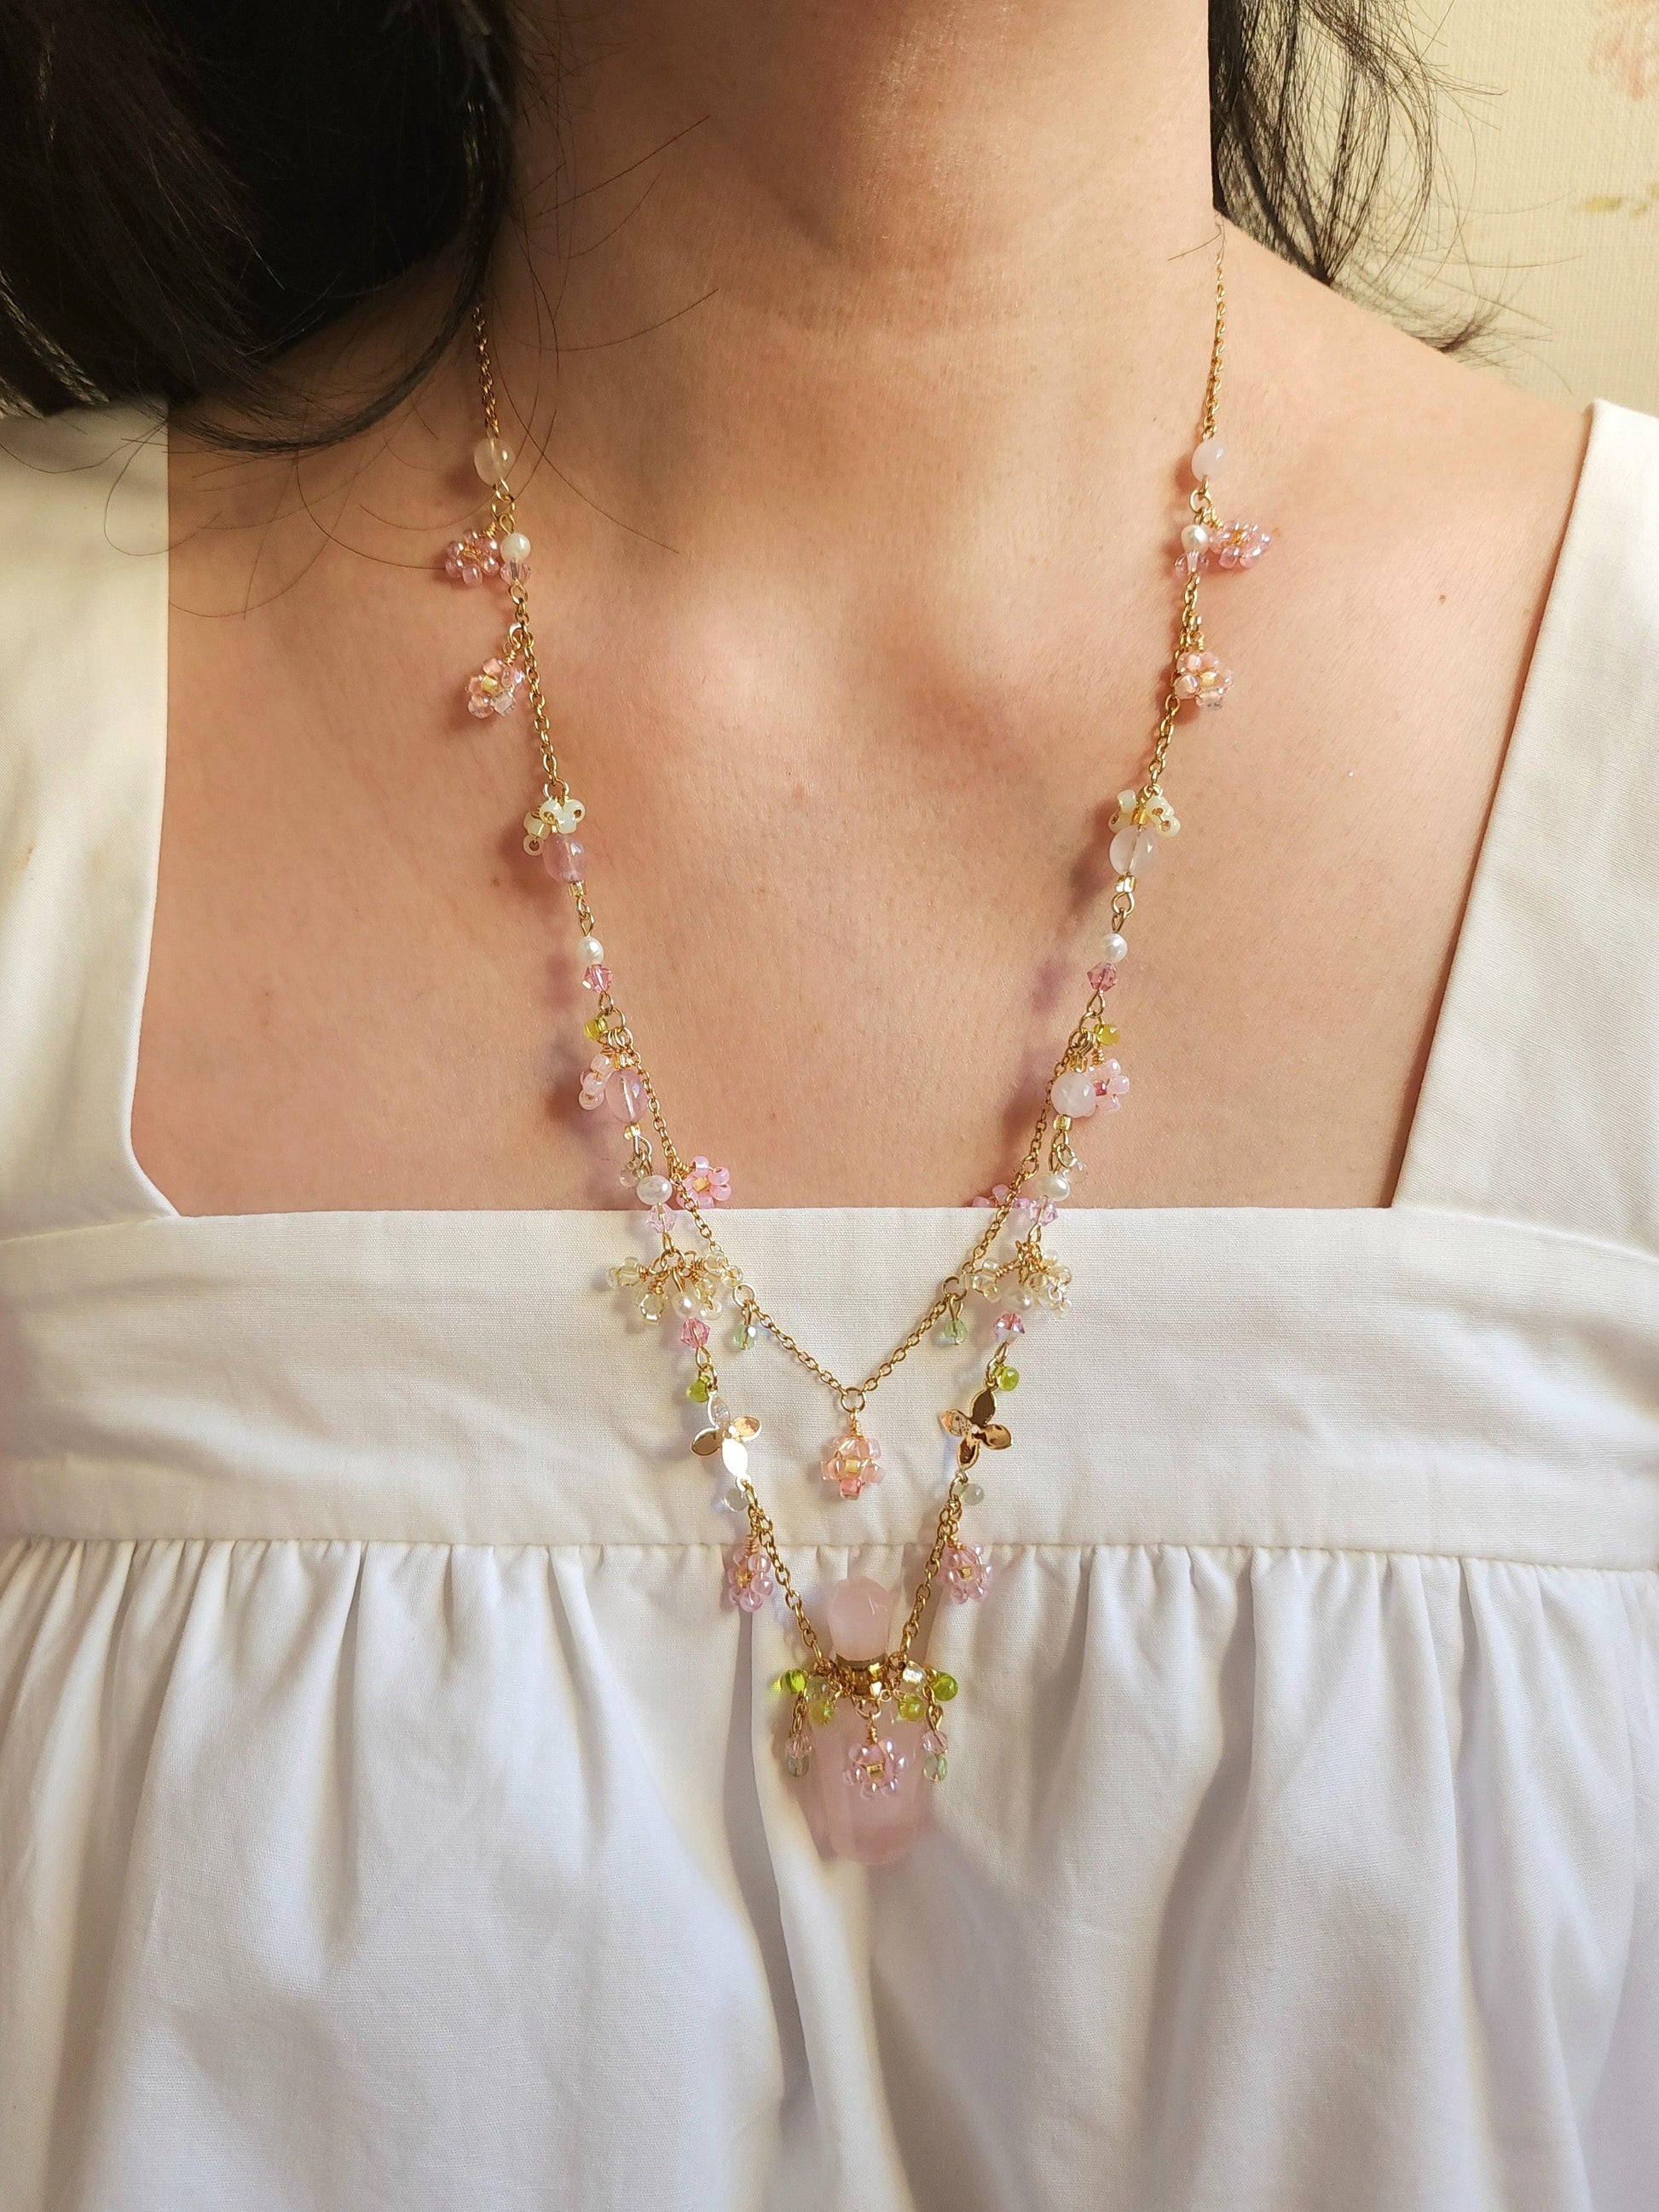 Spring Fairy's Favourite Perfume Bottle Necklace - By Cocoyu